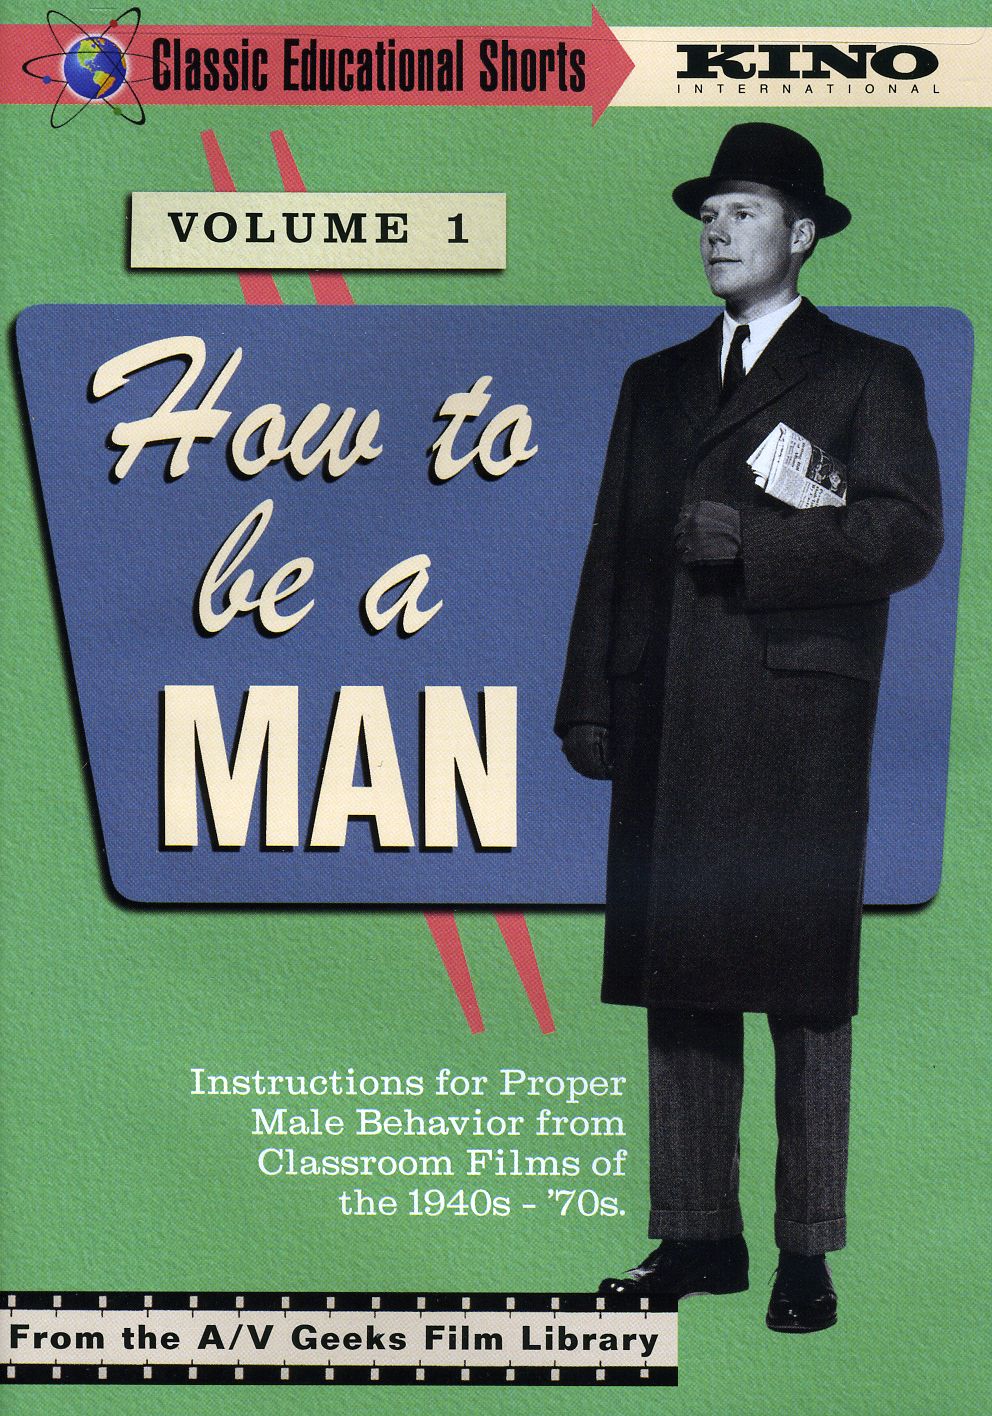 CLASSIC EDUCATIONAL SHORTS 1: HOW TO BE A MAN